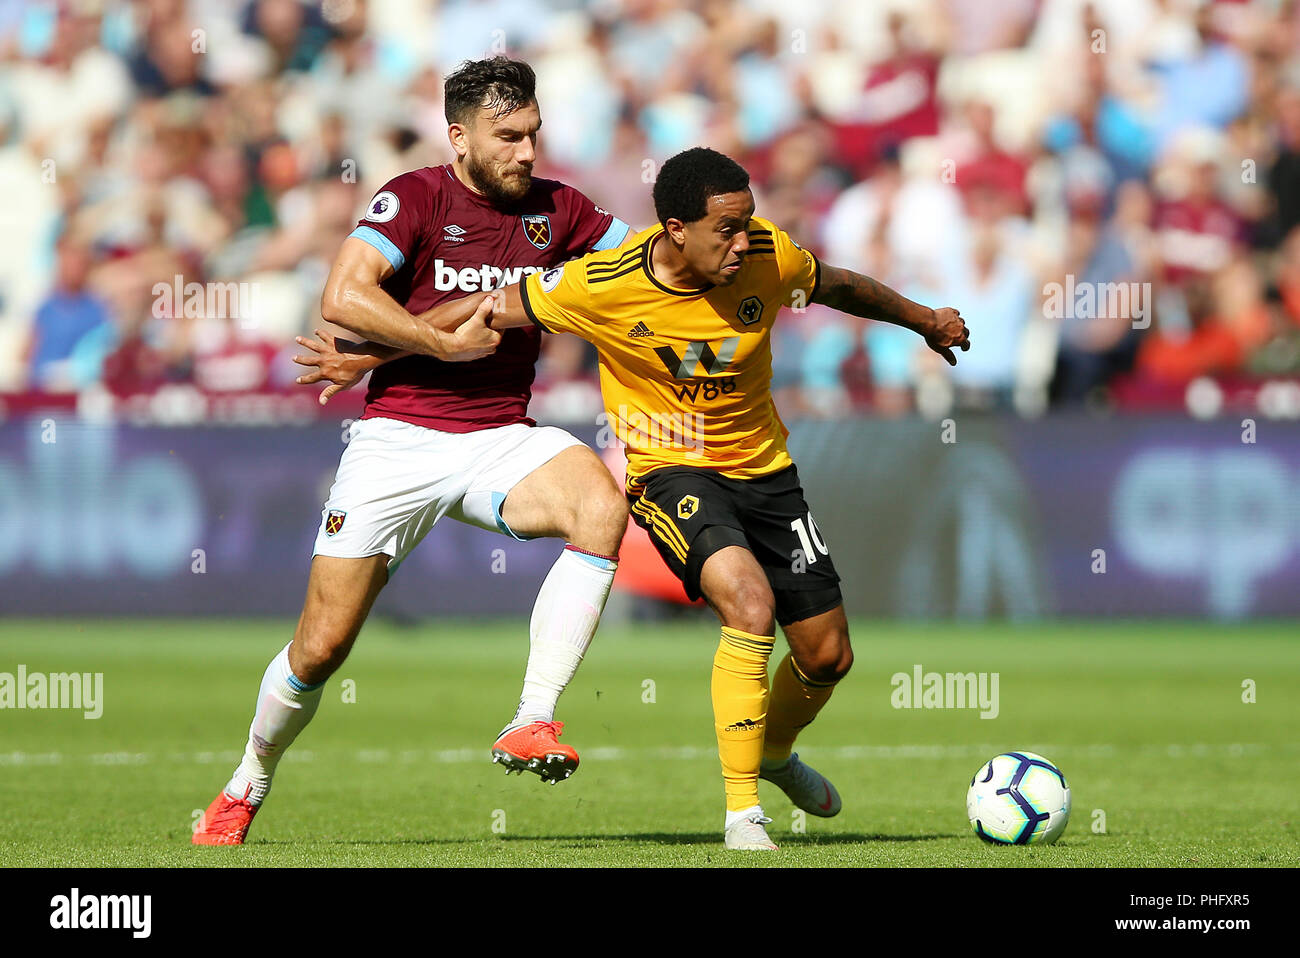 West Ham United's Robert Snodgrass (left) and Wolverhampton Wanderers' Helder Costa battle for the ball during the Premier League match at London Stadium. Stock Photo